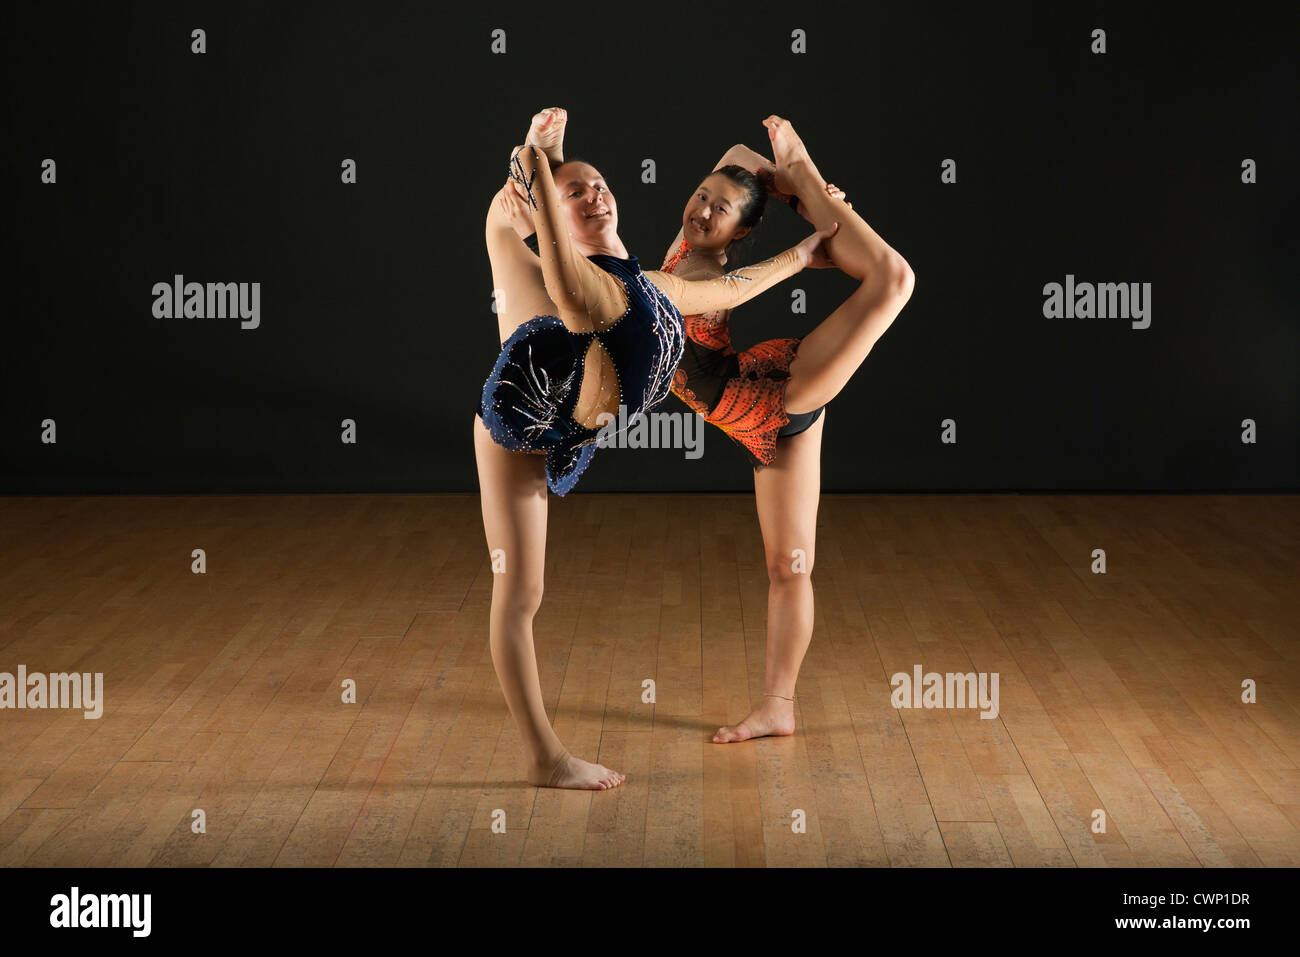 Gymnasts performing standing splits together, portrait Stock Photo